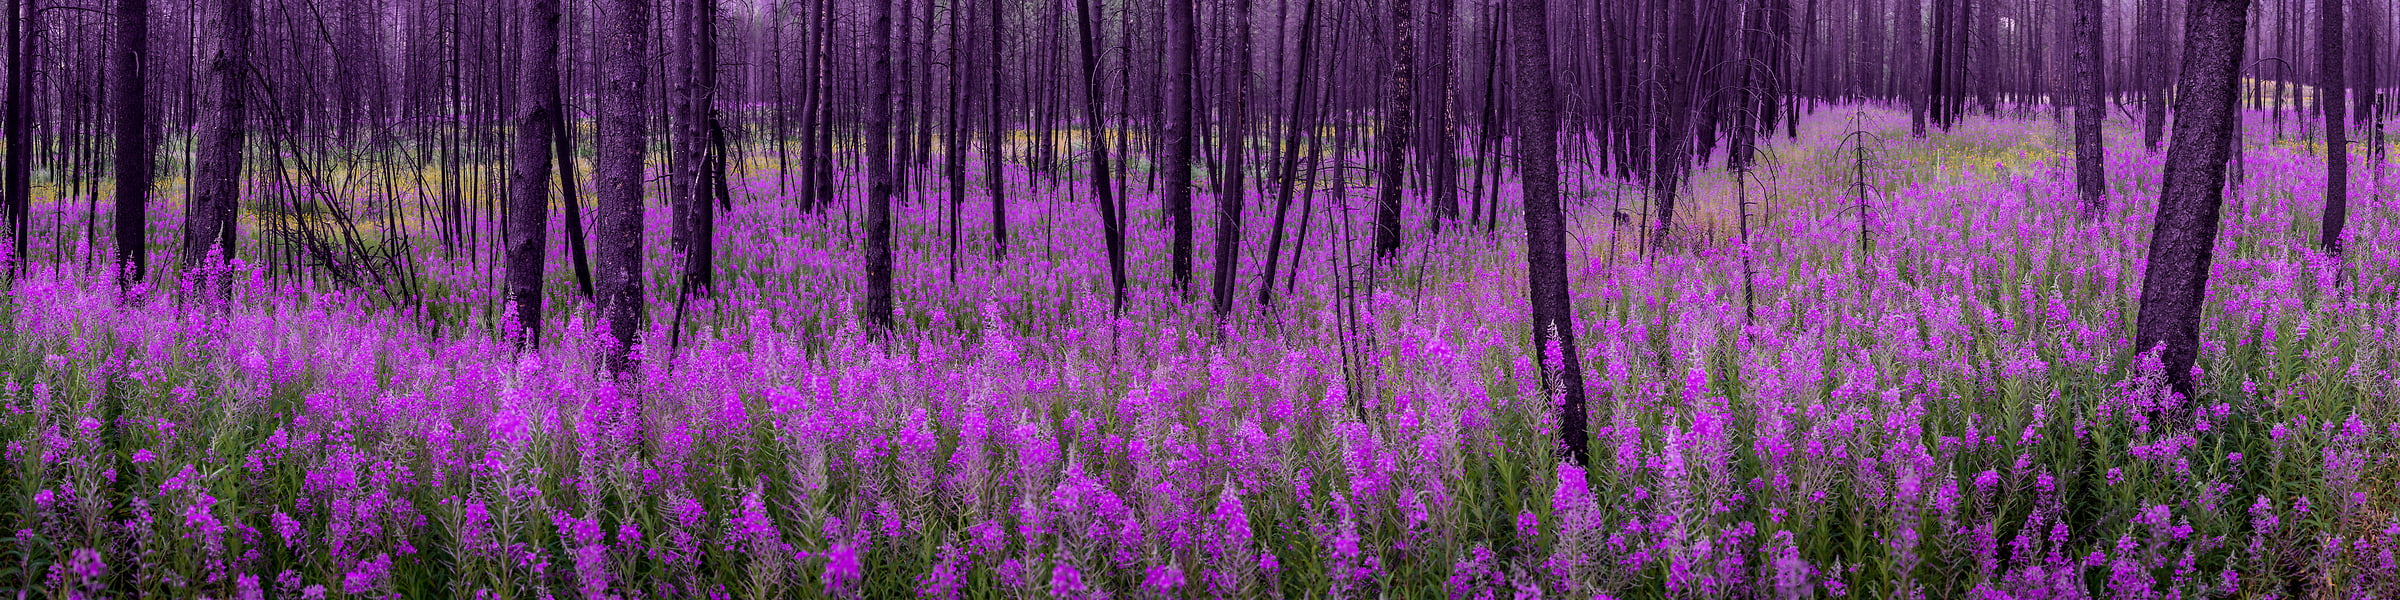 245 megapixels! A very high resolution, large-format VAST photo print of wildflowers in a forest; nature photograph created by Tim Shields in Rock Creek Provincial park, British Columbia, Canada